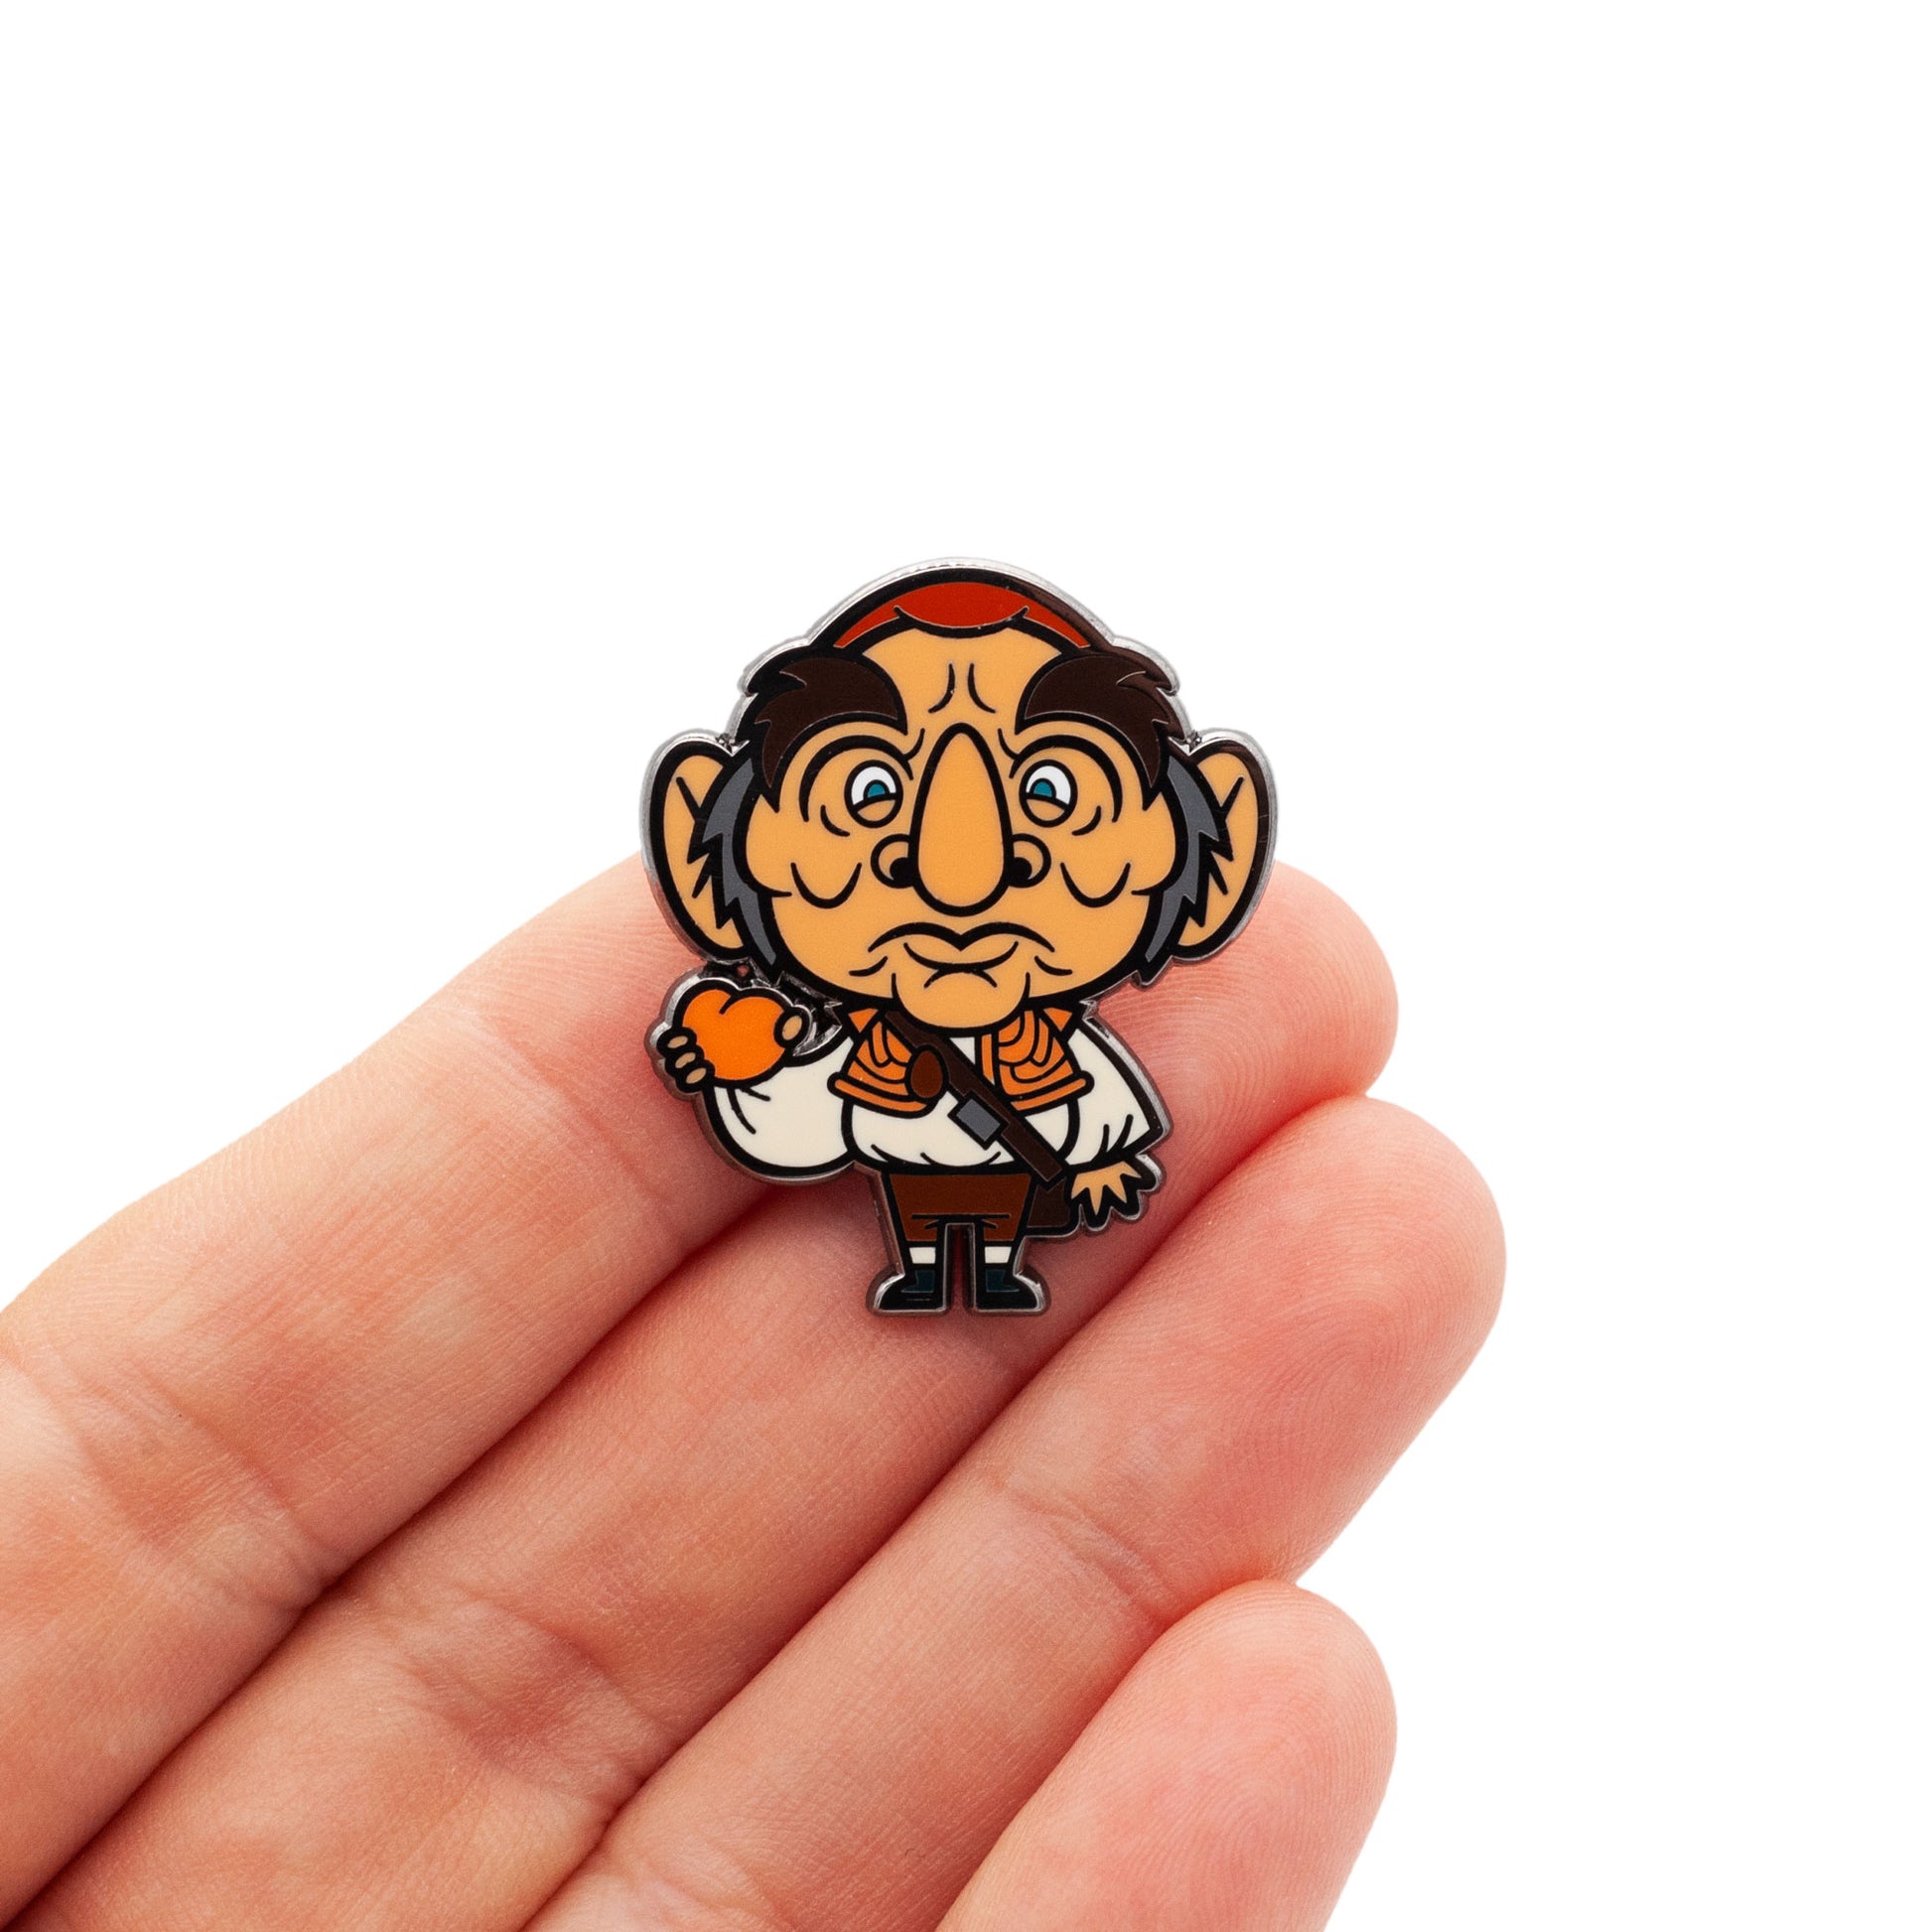 illustration turned into a pin for the character of Hoggle from Labyrinth. Colors include brown, tan, white, and orange for the peach he is holding. So cute!